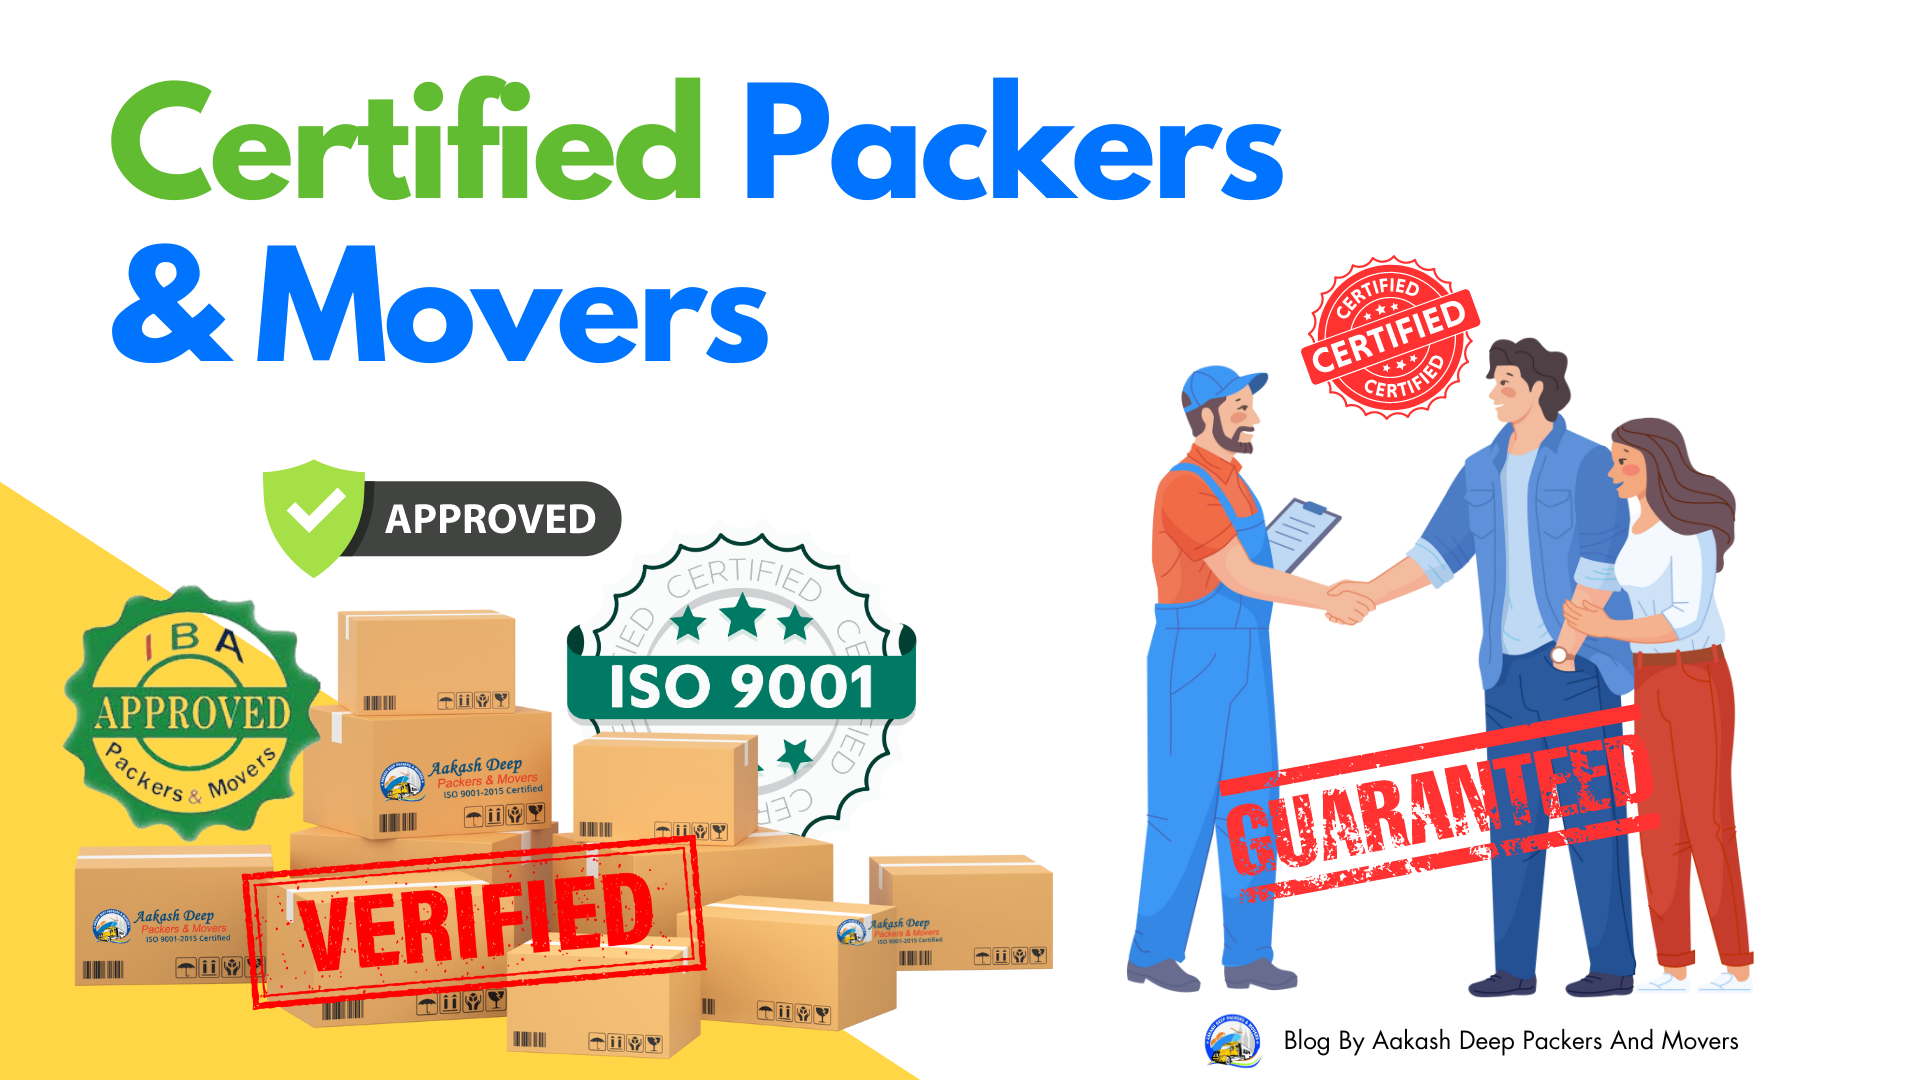 The Ultimate Guide to Certified Packers and Movers: Decoding IBA Approval, ISO Verification, and More! 📦🚛